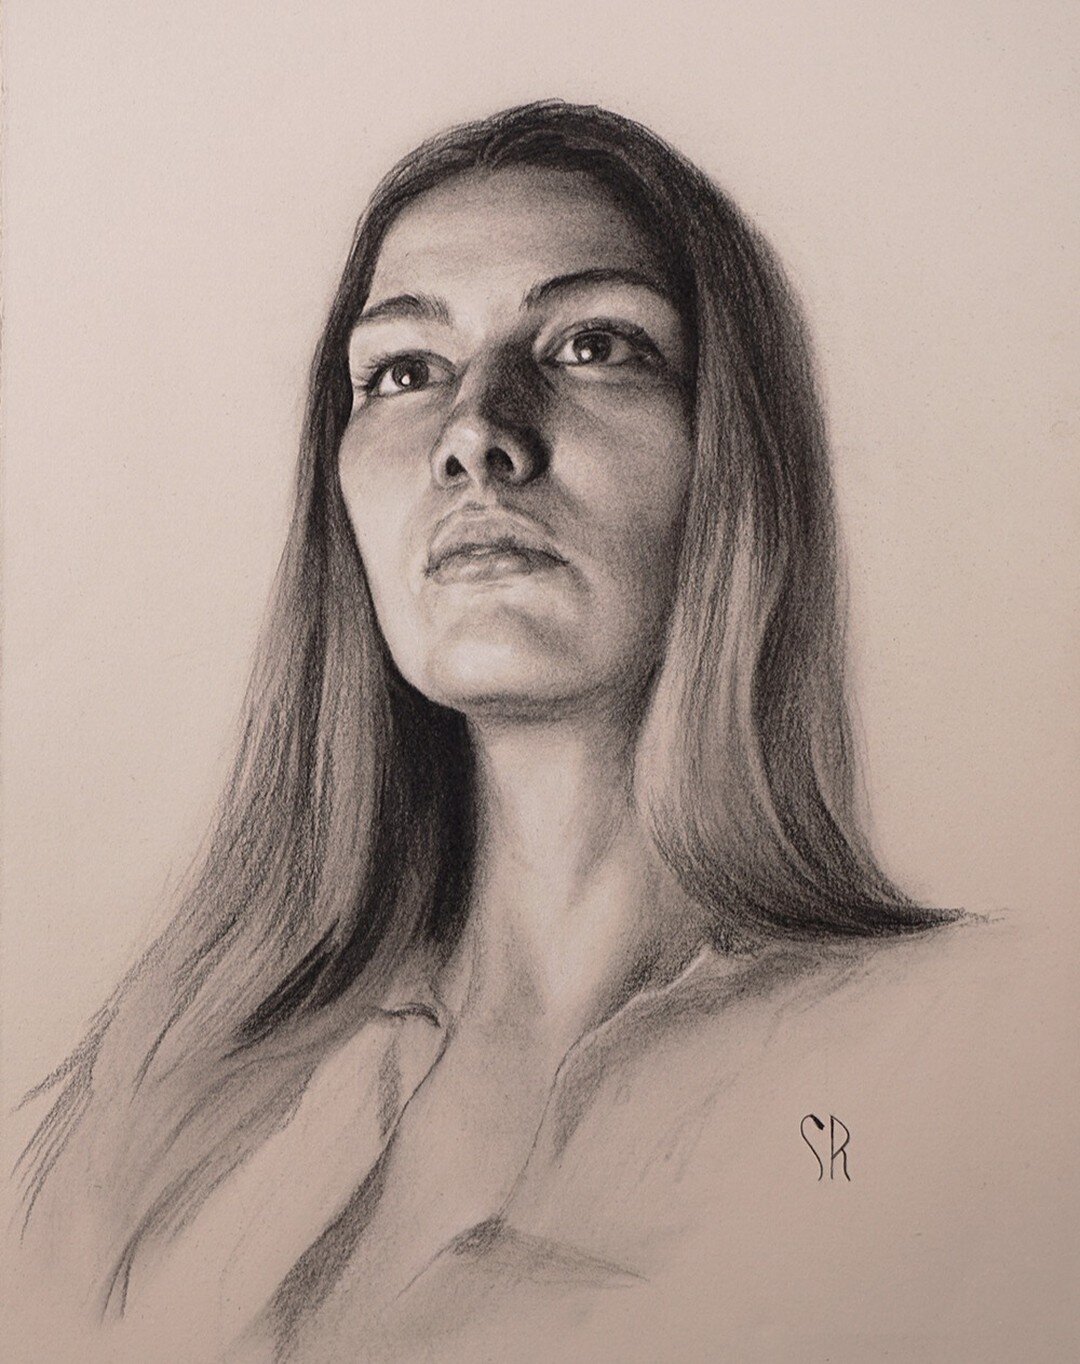 Another portrait, this time with vine charcoal and Wolff's carbon pencils.

Thank you to @studiografit and @galinakohvakko for the fantastic reference.

#sketch #draw #charcoal #charcoaldrawing #portraits #portraiture #portraitpage #portraitmood #ins